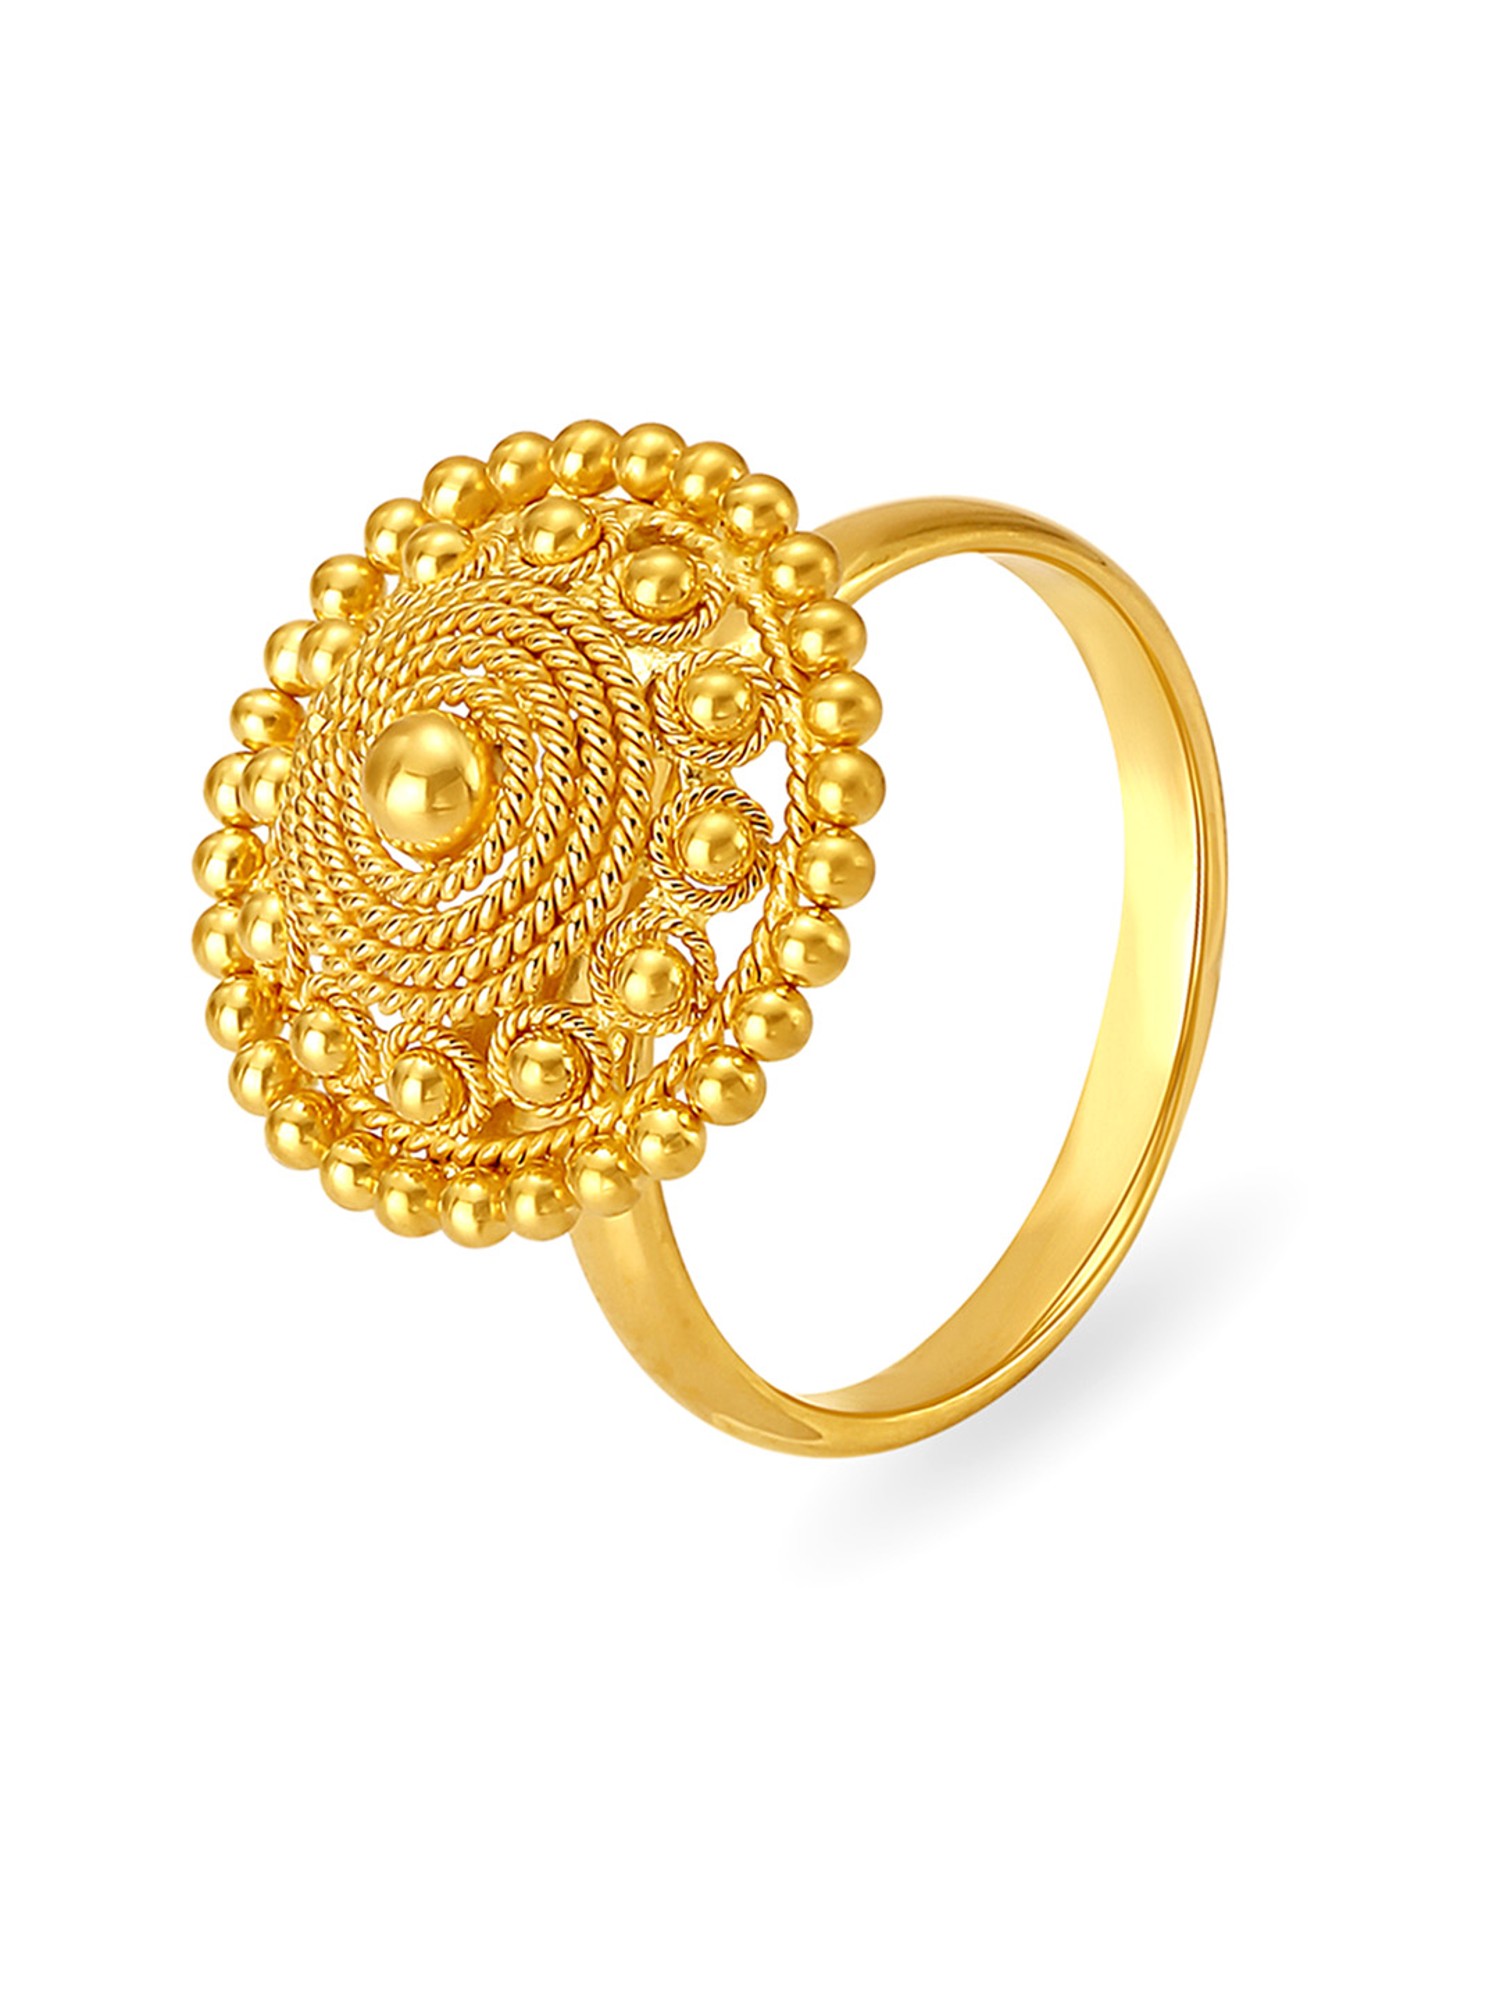 Tanishq 22KT Gold Finger Ring, Size: 17.20mm at Rs 14738/piece in Indore |  ID: 20885553833